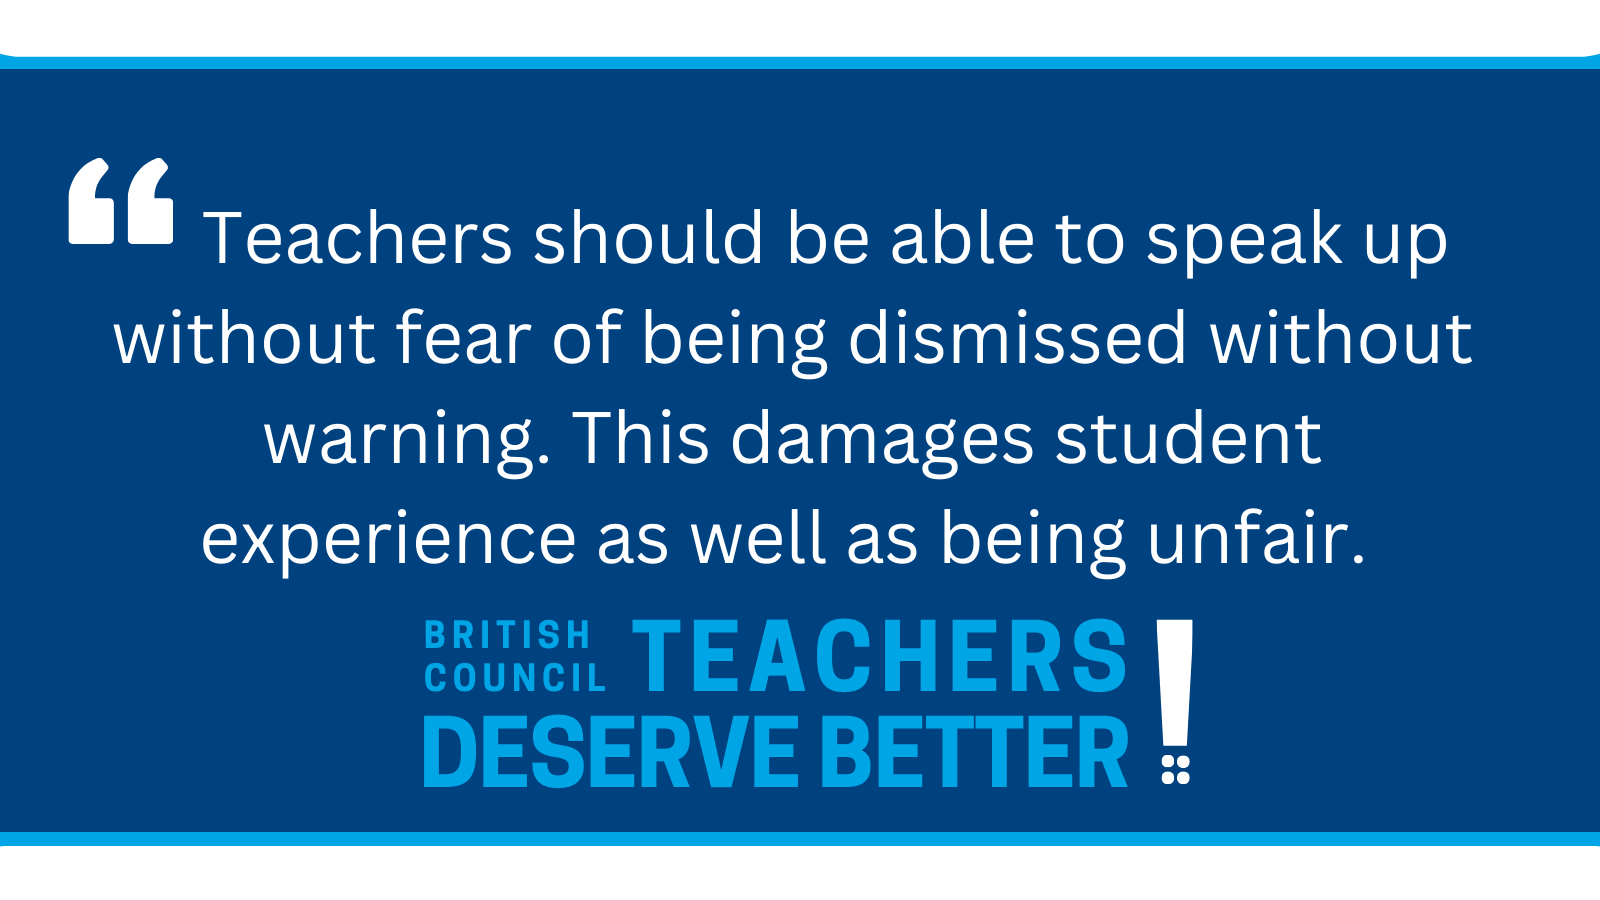 Image reads: Teachers should be able to speak up without fear of being dismissed without warning. This damages student experience as well as being unfair. Below it say "British Council Teachers Deserve Better"